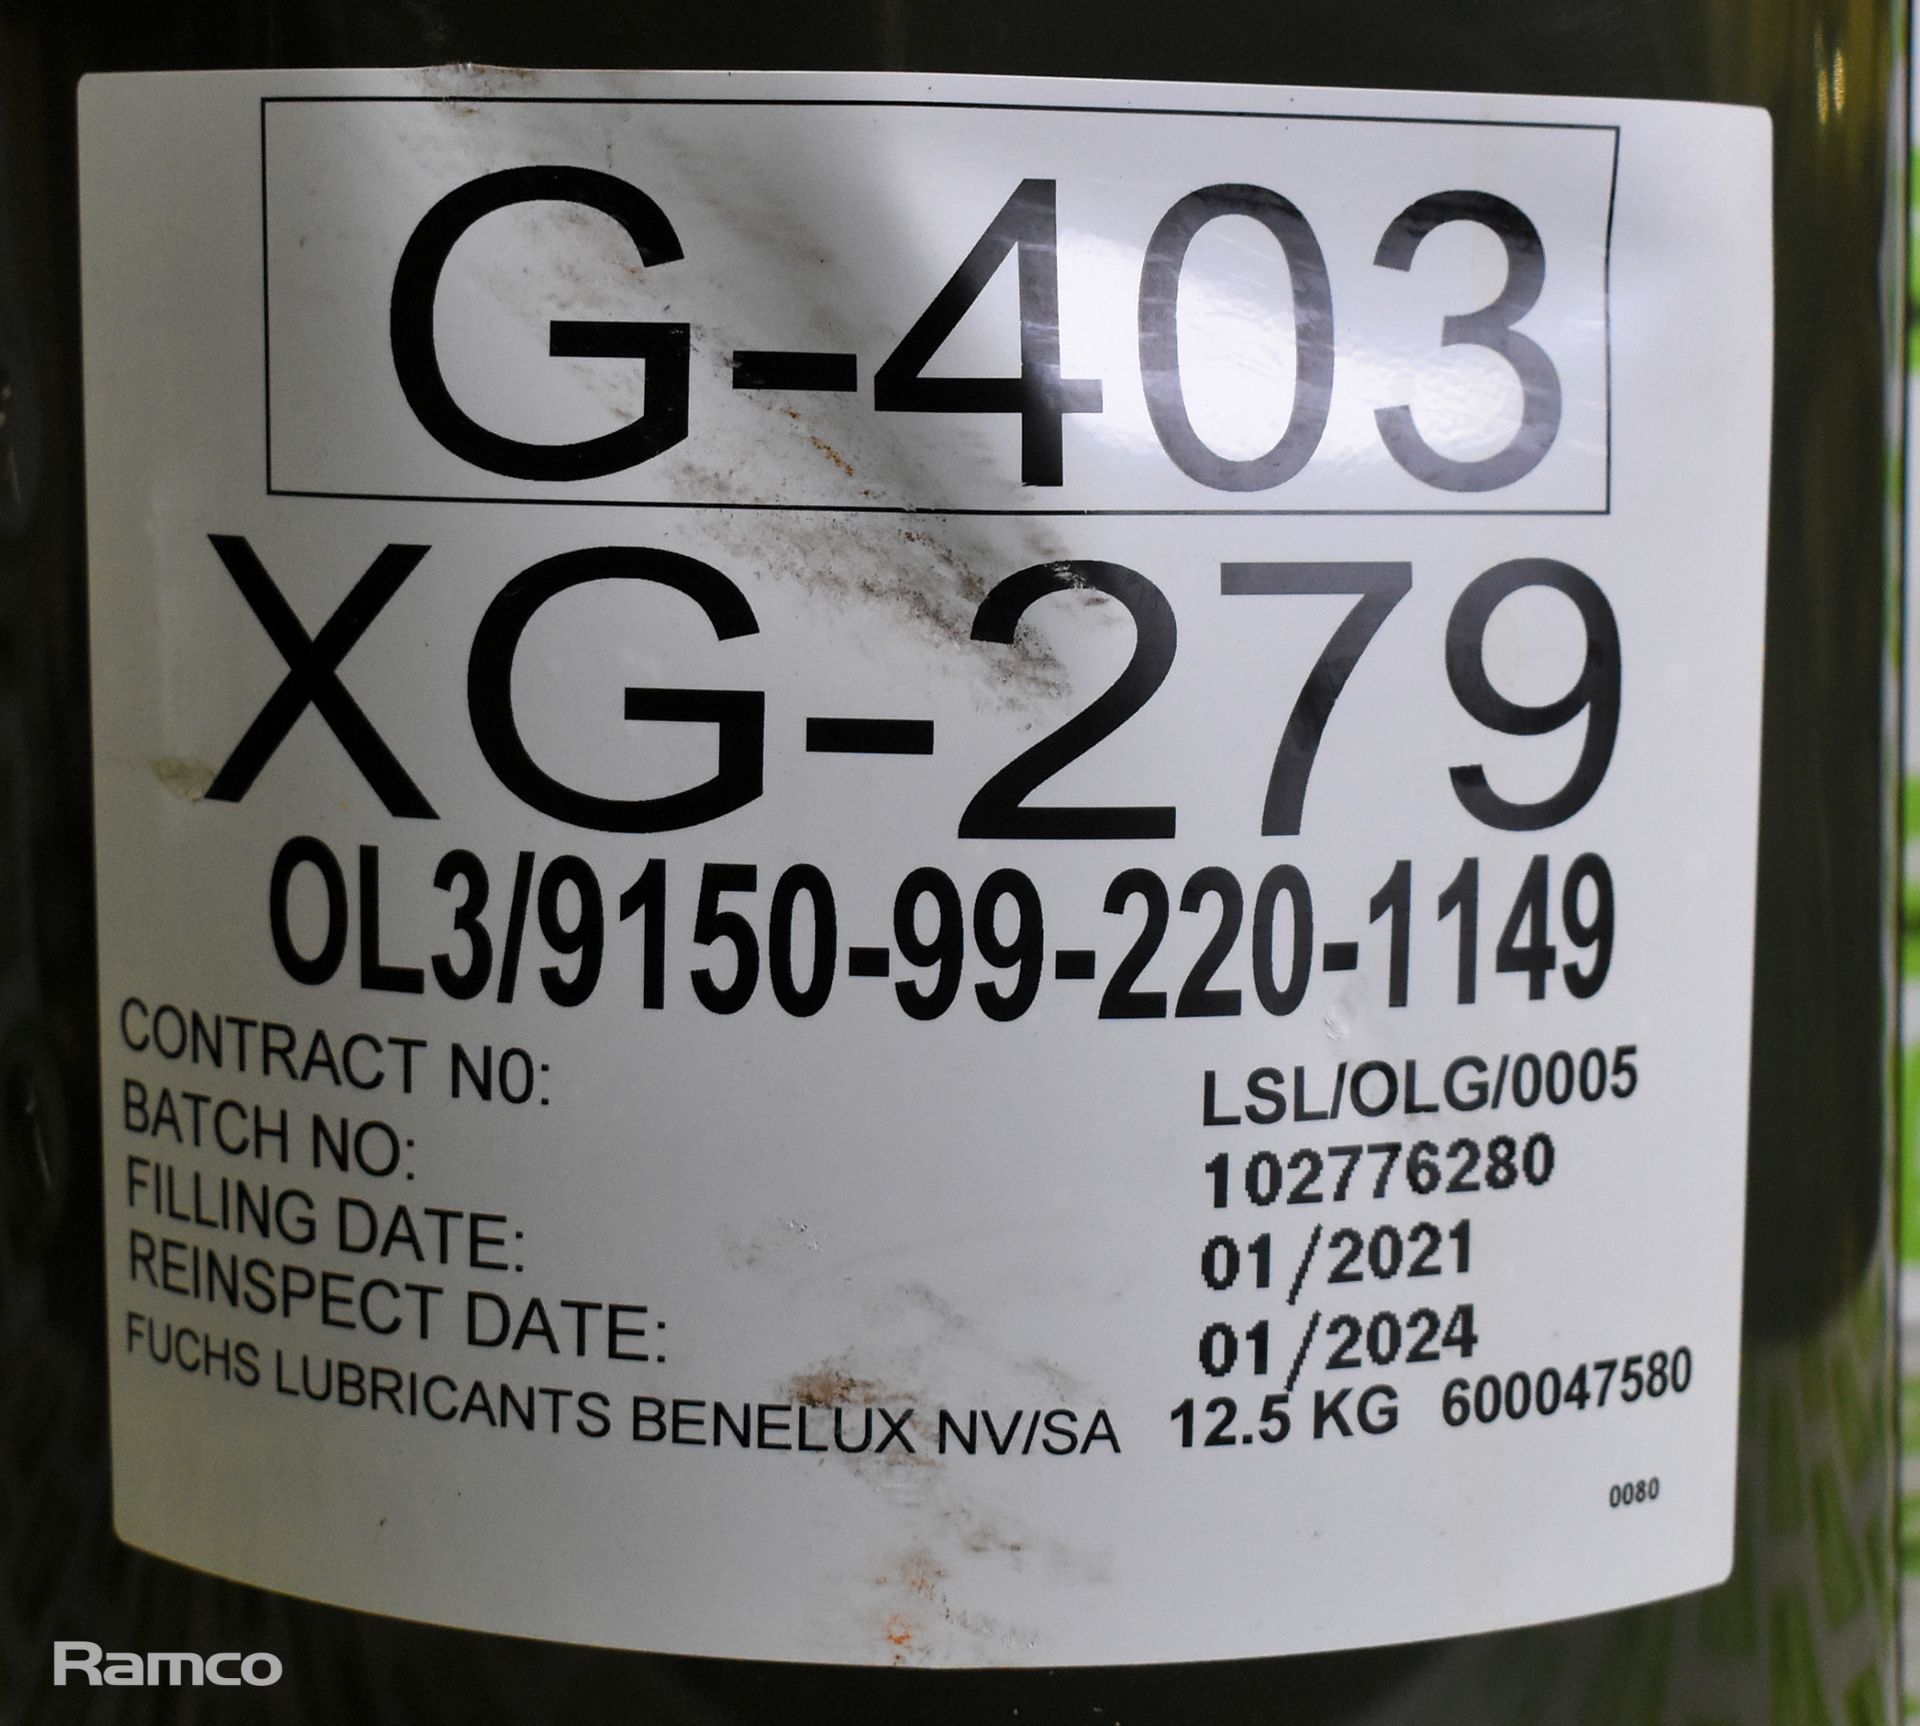 Fuchs Lubricants G-403 - XG-279 grease - reinspect date 01/2024 - NOT FOR EXPORT - Image 2 of 2